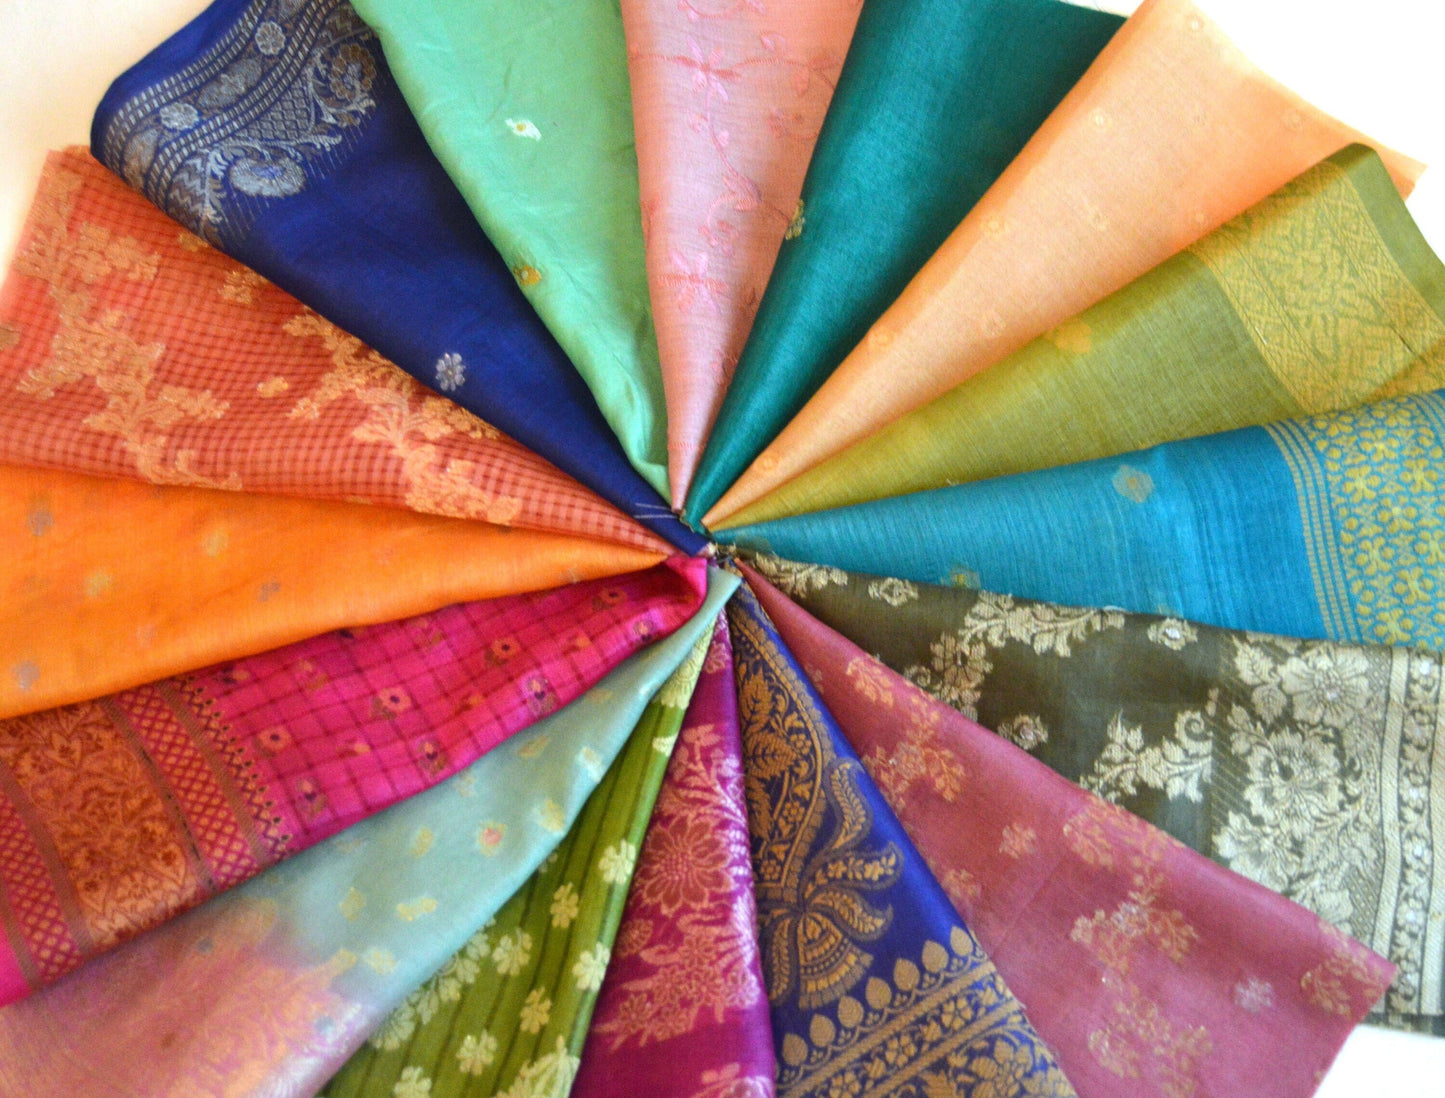 8 Inch x 16 Pieces Mixed Colour Upcycled Sari Silk Craft Fabric Card Making Collage Mixed Media Textile Art Sewing Junk Journals